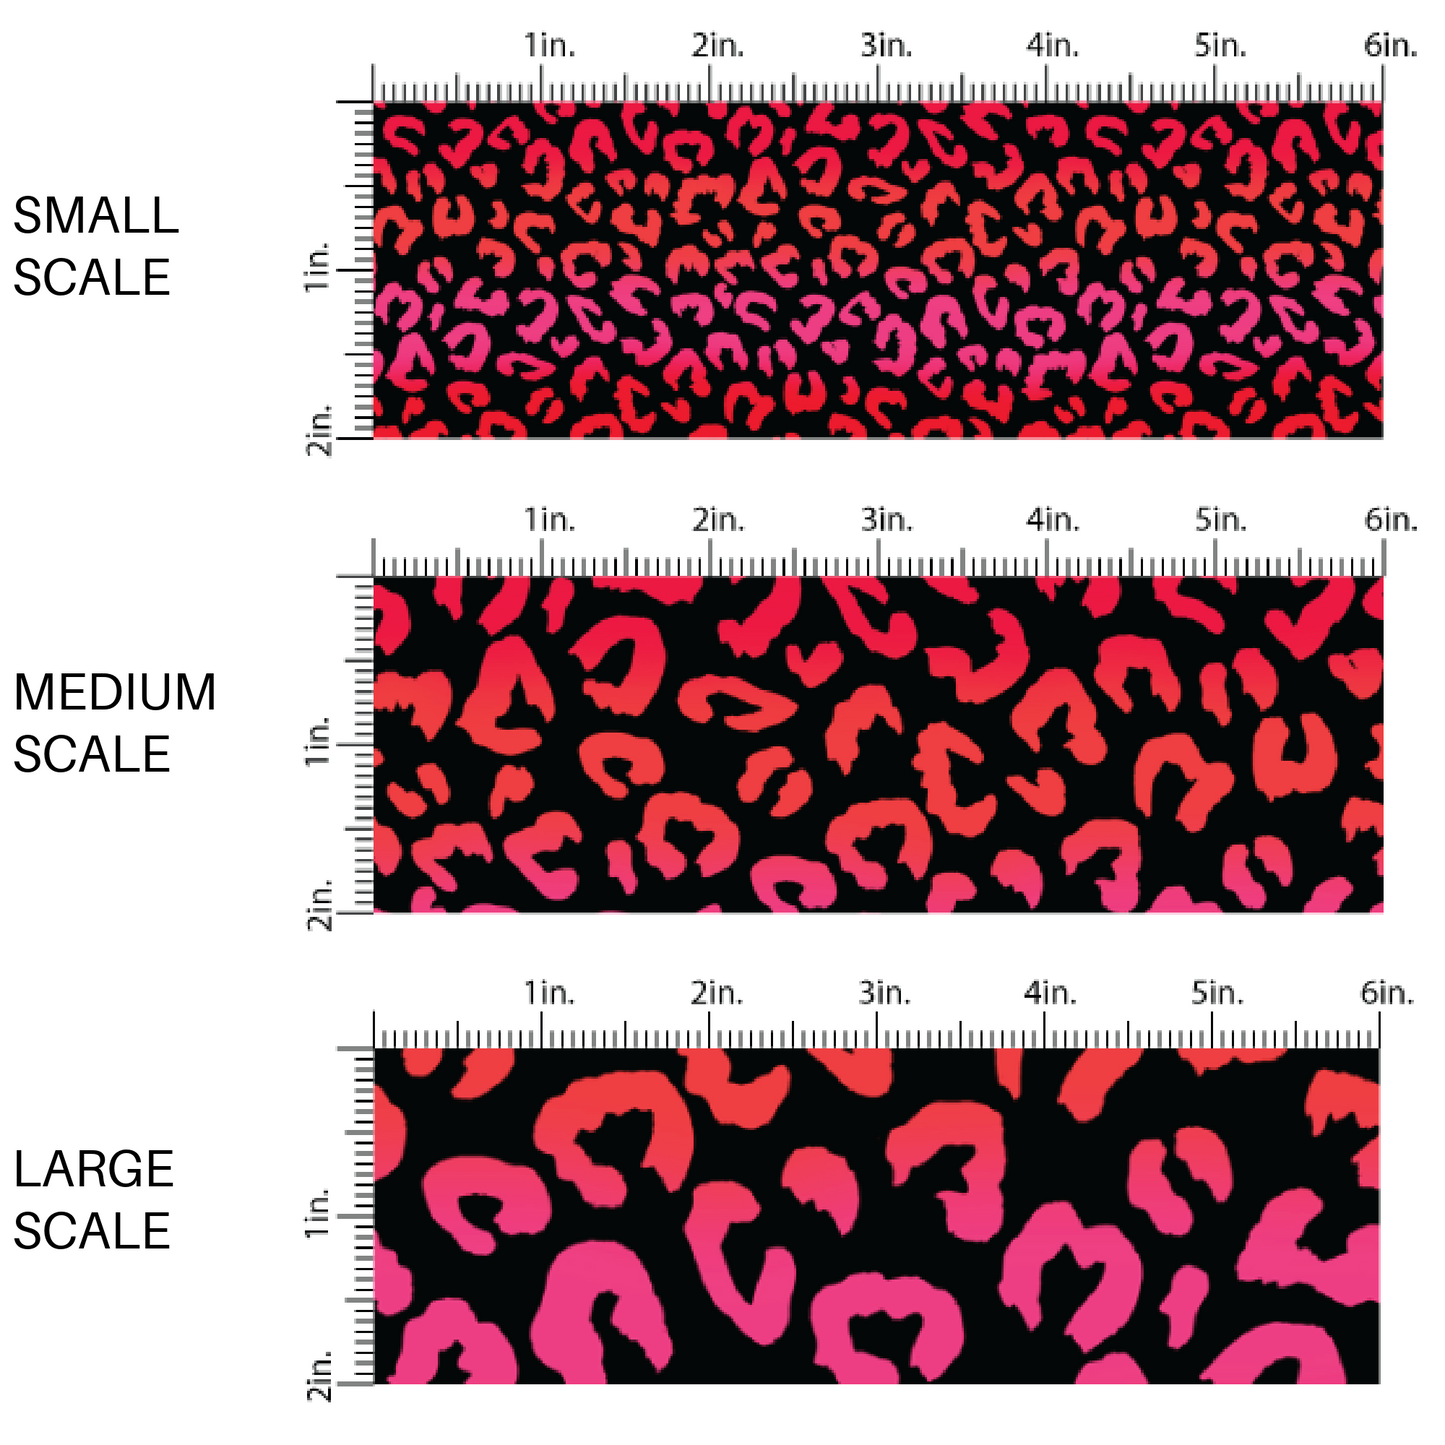 Ombre Pink and Red Leopard Print on Black Fabric by the Yard scaled image guide.